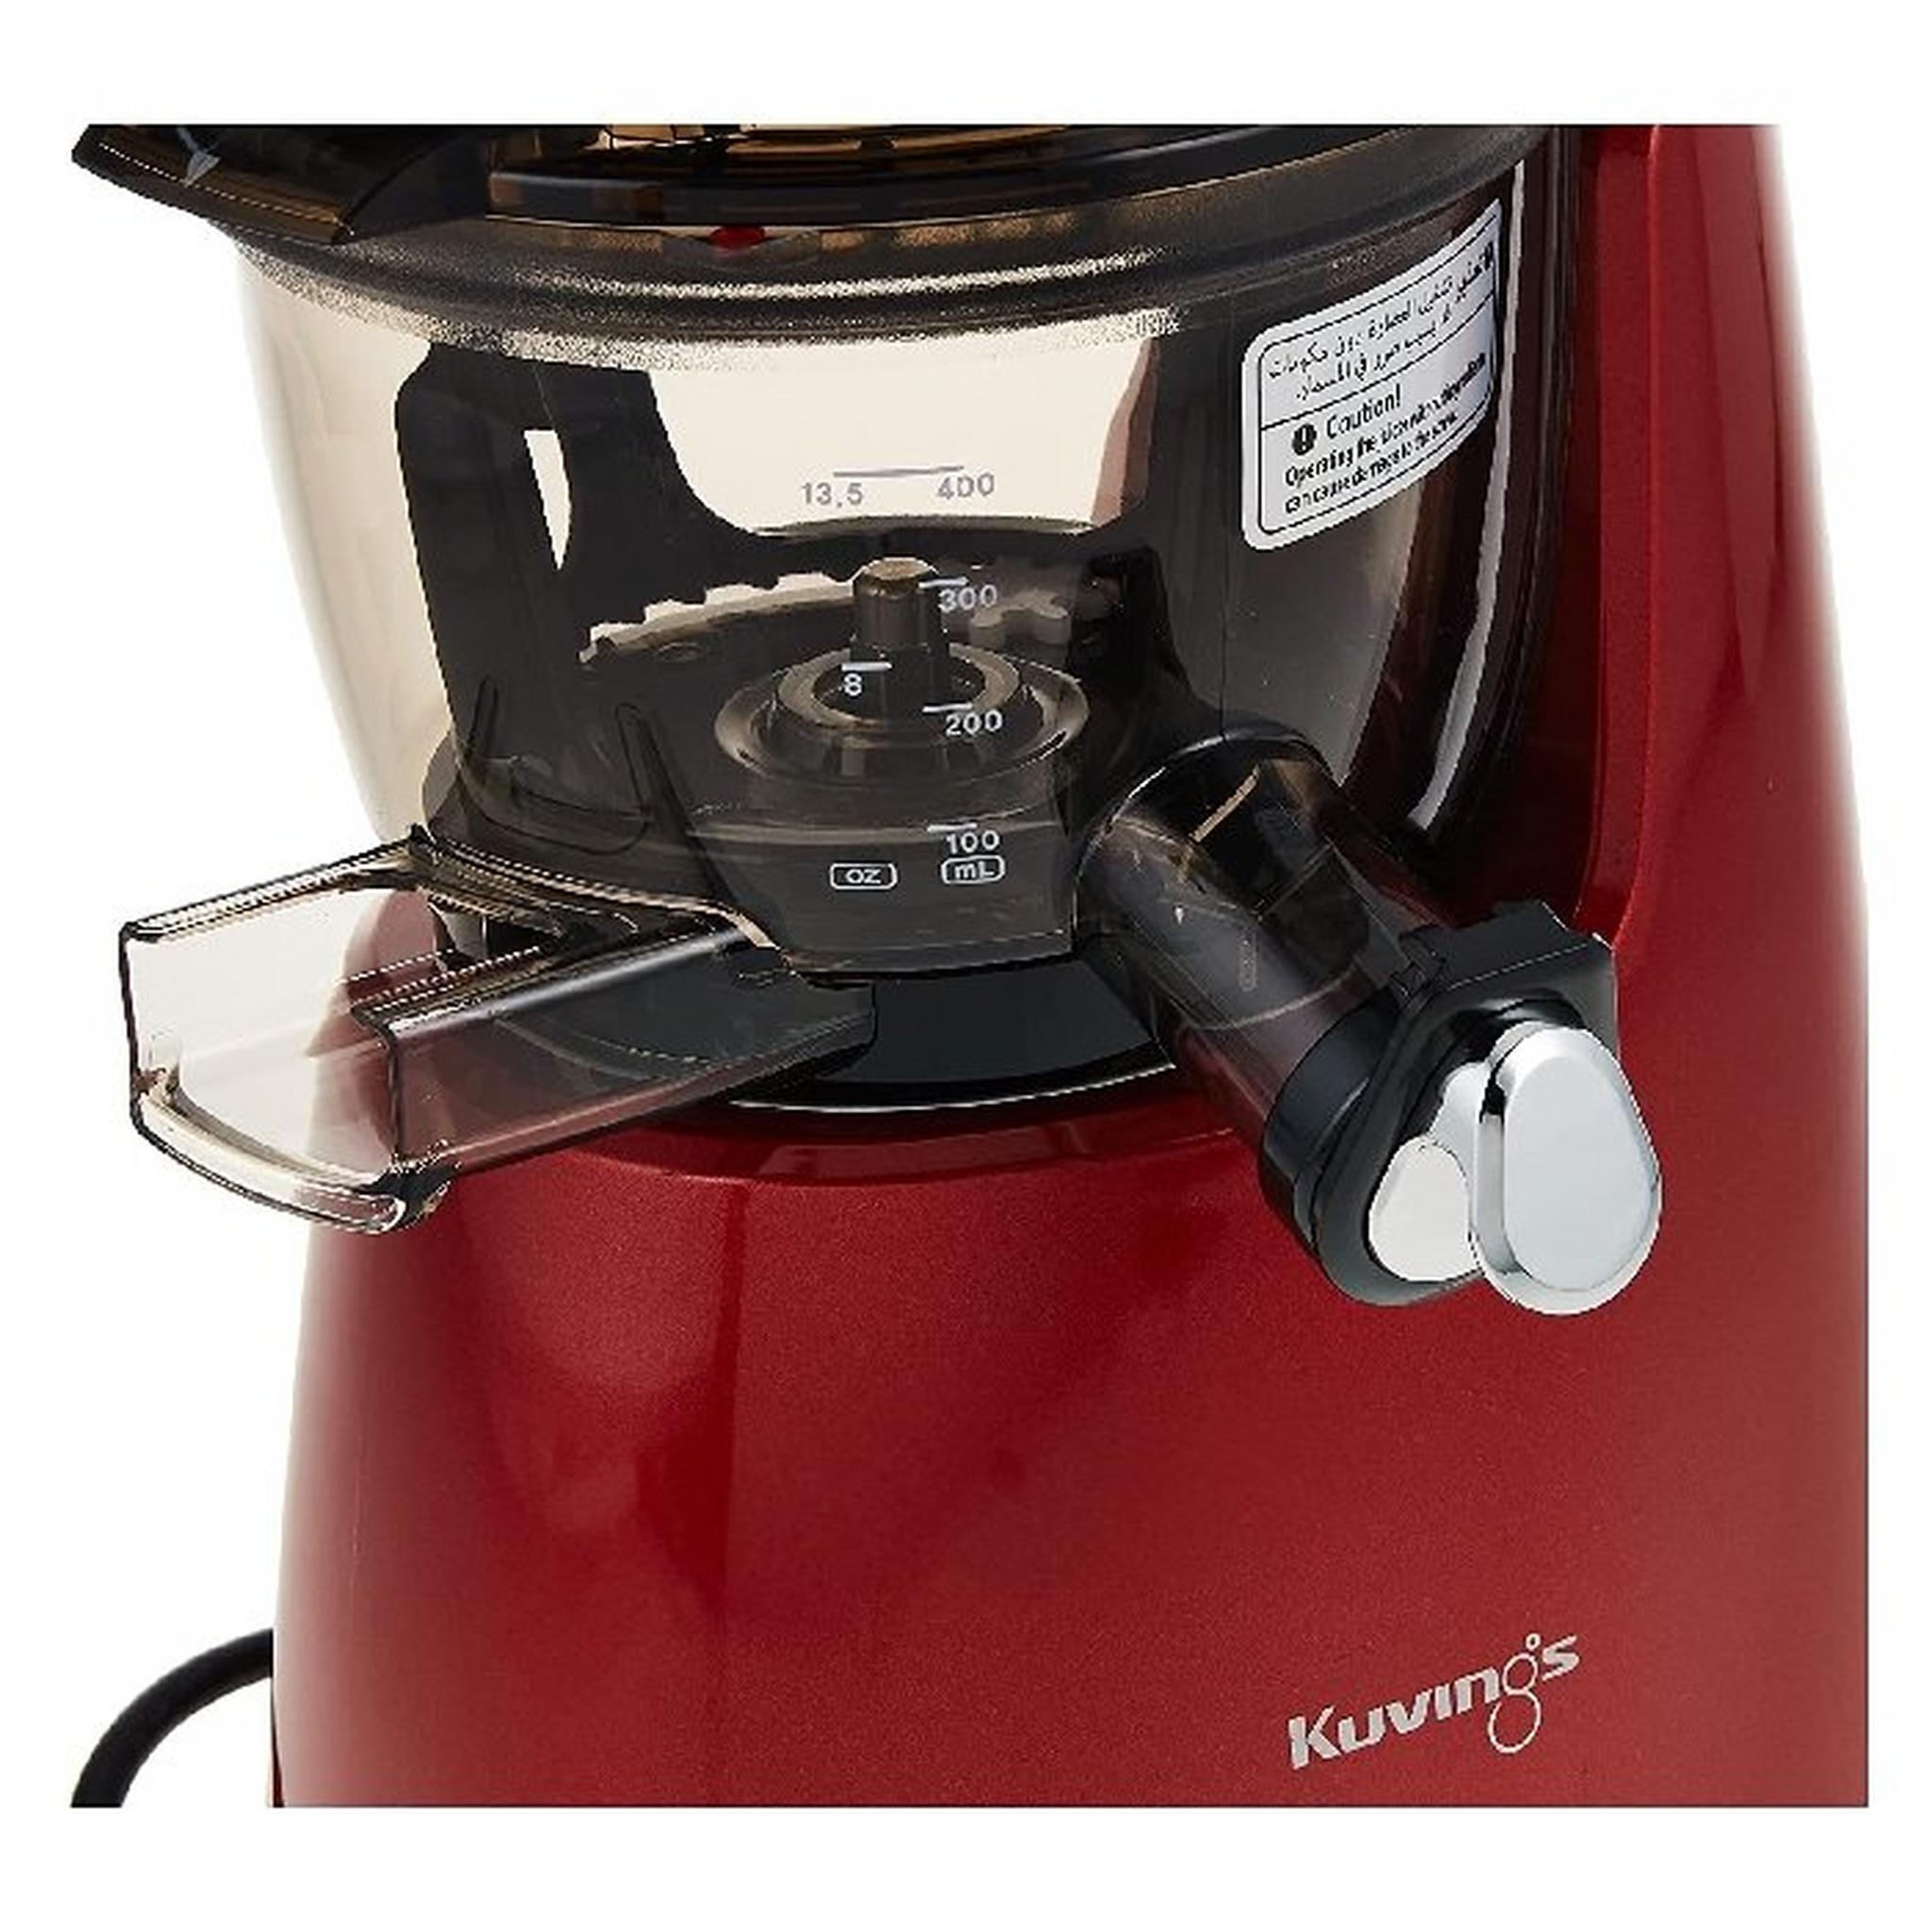 Kuvings C7000 Slow Juice Extractor - 240W (KV-NS723CBC2-RD) Red